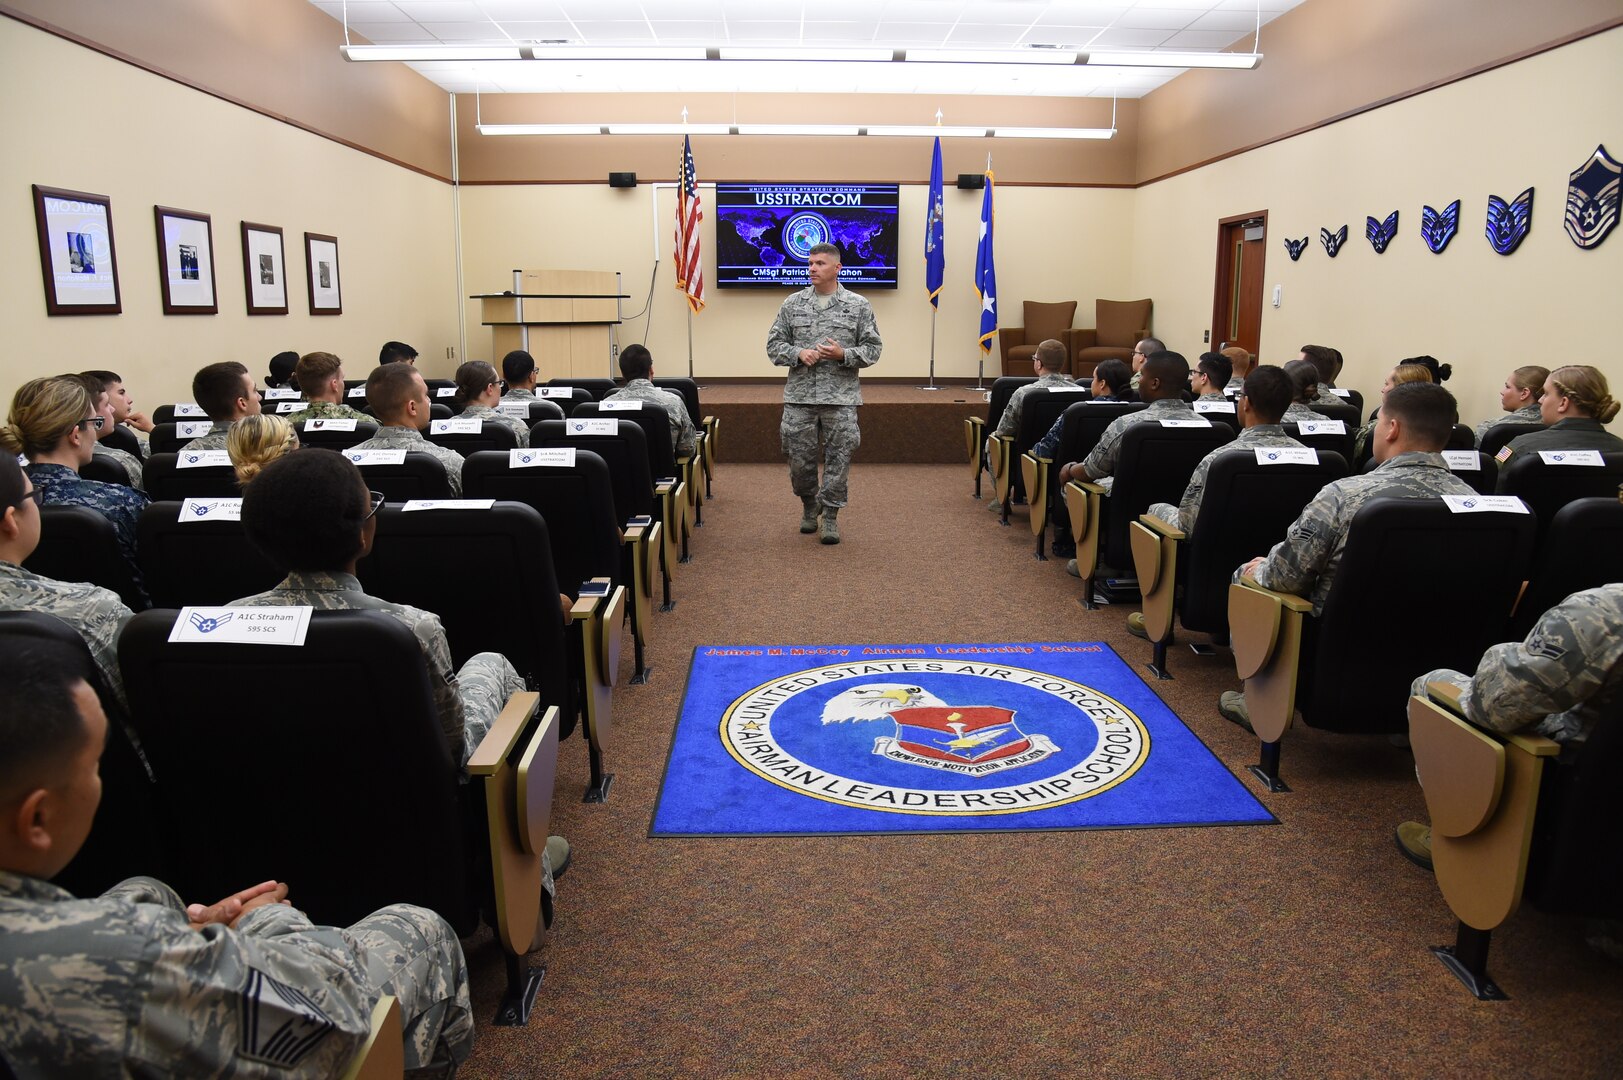 U.S. Air Force Chief Master Sgt. Patrick McMahon, U.S. Strategic Command (USSTRATCOM) senior enlisted leader, speaks to junior-enlisted military members stationed at Offutt Air Force Base, Neb., during the inaugural Junior Enlisted Professional Development Seminar, July 19, 2018. During the seminar, junior-enlisted members discussed a variety of topics with USSTRATCOM non-commissioned officers, petty officers and senior leaders. Topics included leadership, junior-enlisted roles and responsibilities, mentoring, military traditions and history, educational benefits, and customs and courtesies. USSTRATCOM has global responsibilities assigned through the Unified Command Plan that include strategic deterrence, nuclear operations, space operations, joint electromagnetic spectrum operations, global strike, missile defense, and analysis and targeting.